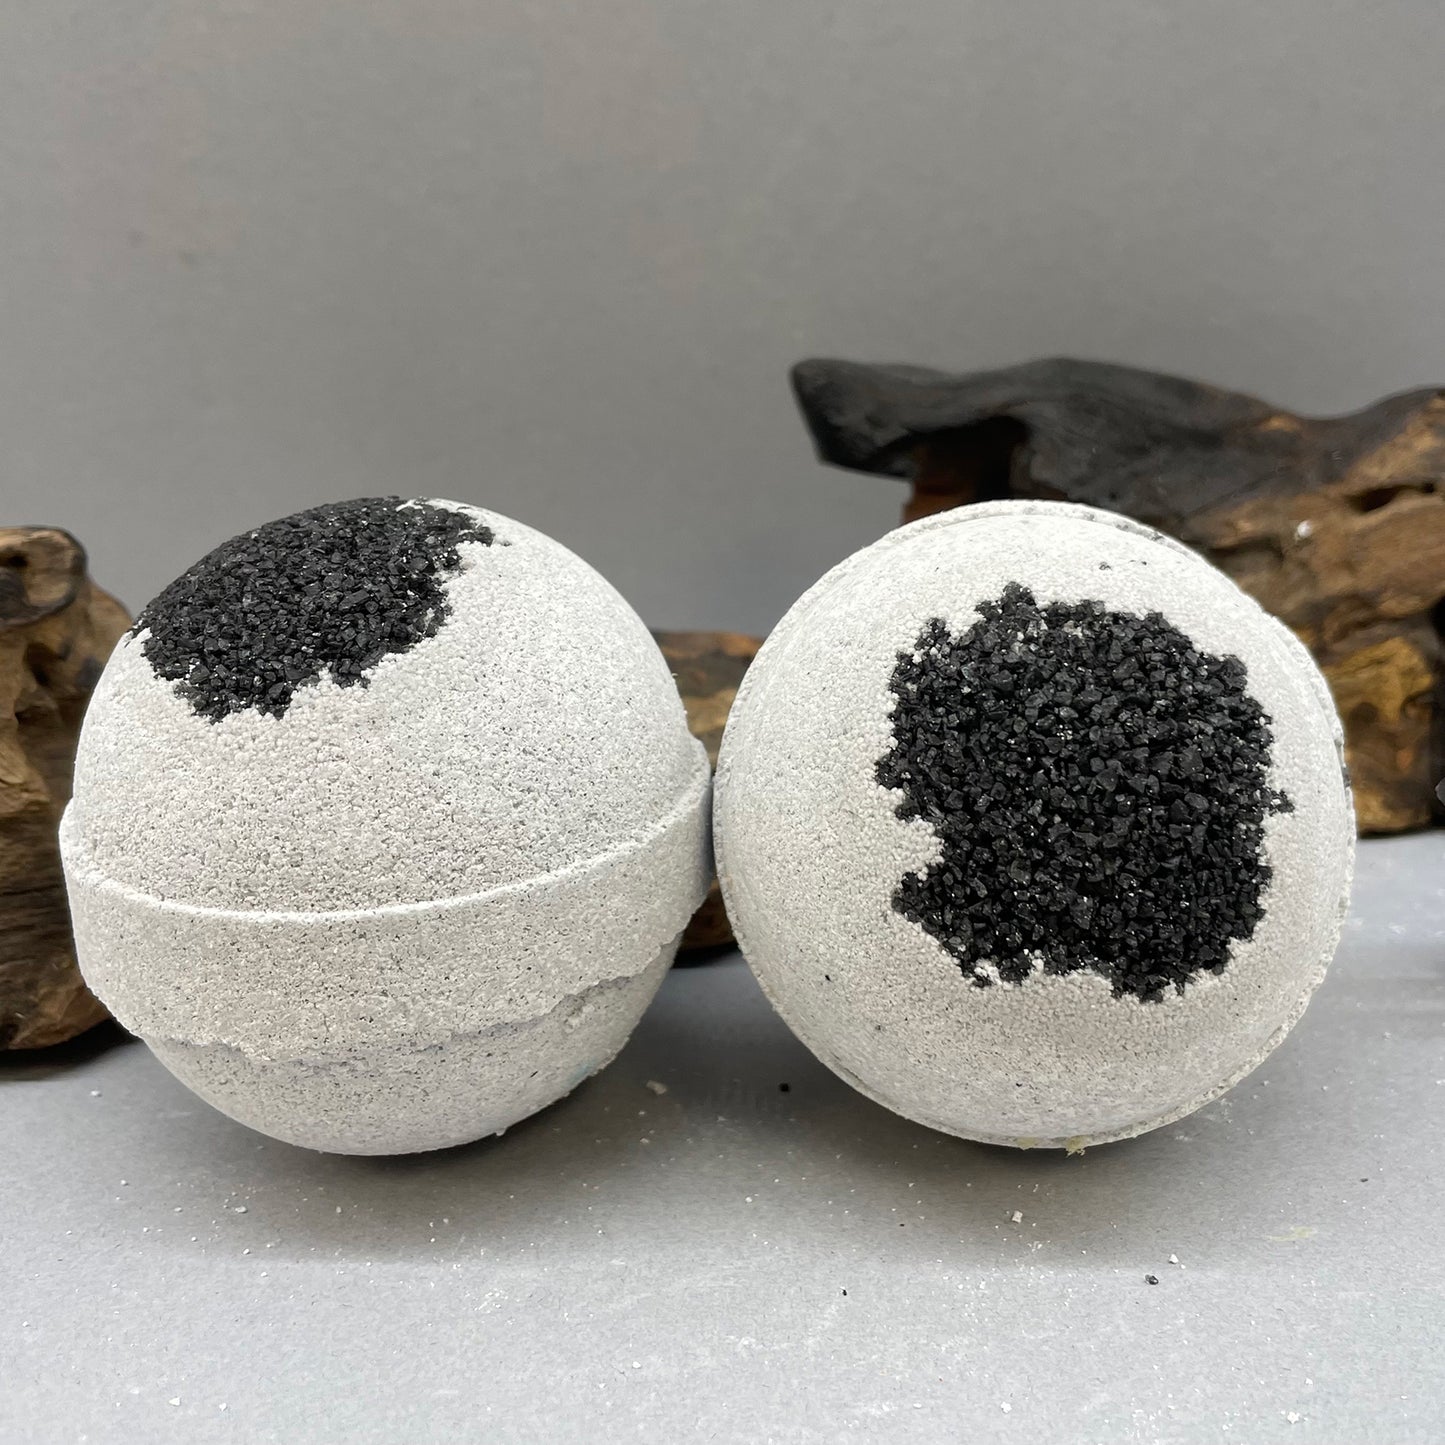 Activated Charcoal Bath Bomb